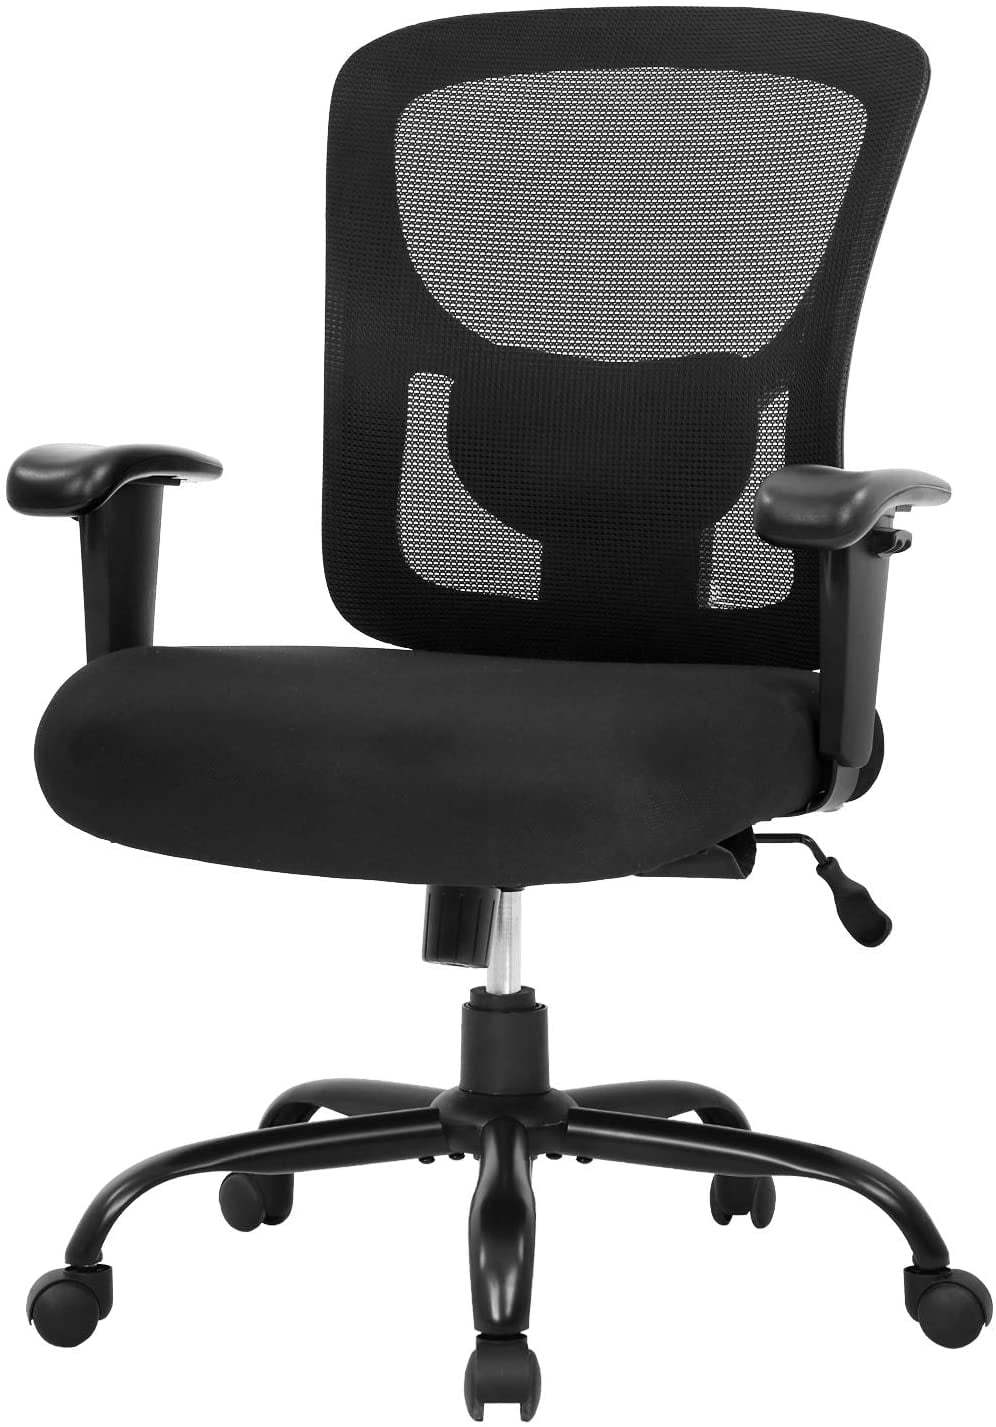 High Back Executive Managerial Chair Heavy Duty Metal Base Adjustable Height Large Wide Padded Seat Computer Swivel Task Desk Chair Black Big & Tall Bonded Leather Office Chair 400lb 